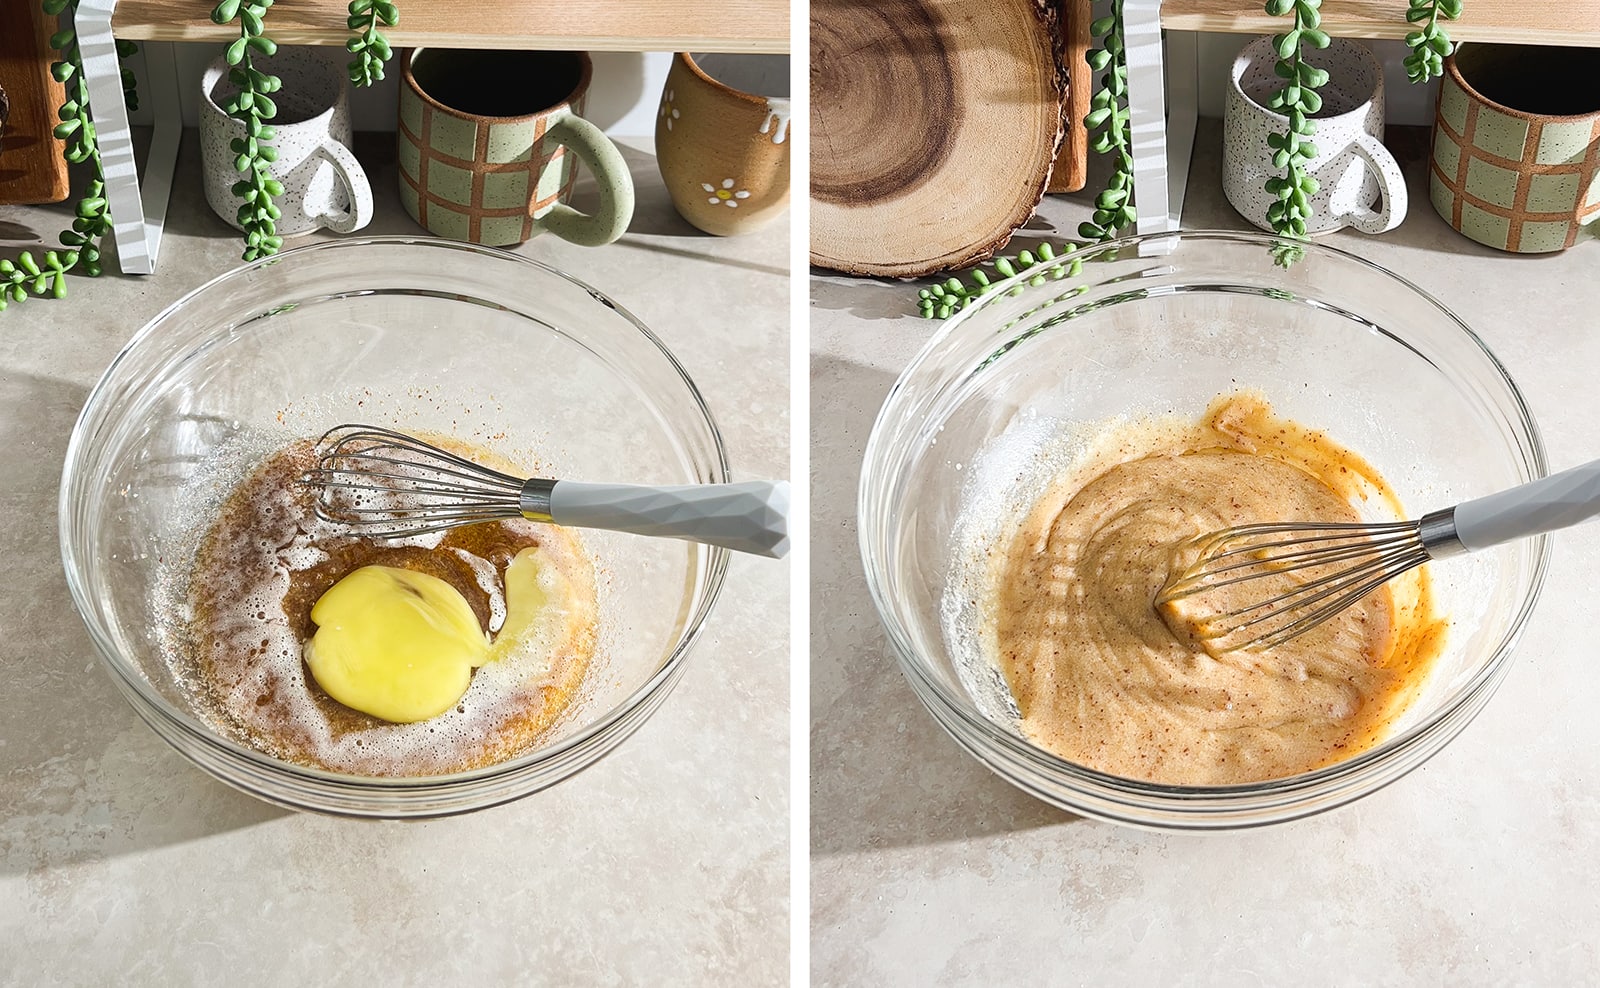 Left to right: egg added to browned butter in bowl, batter with whisk in bowl.